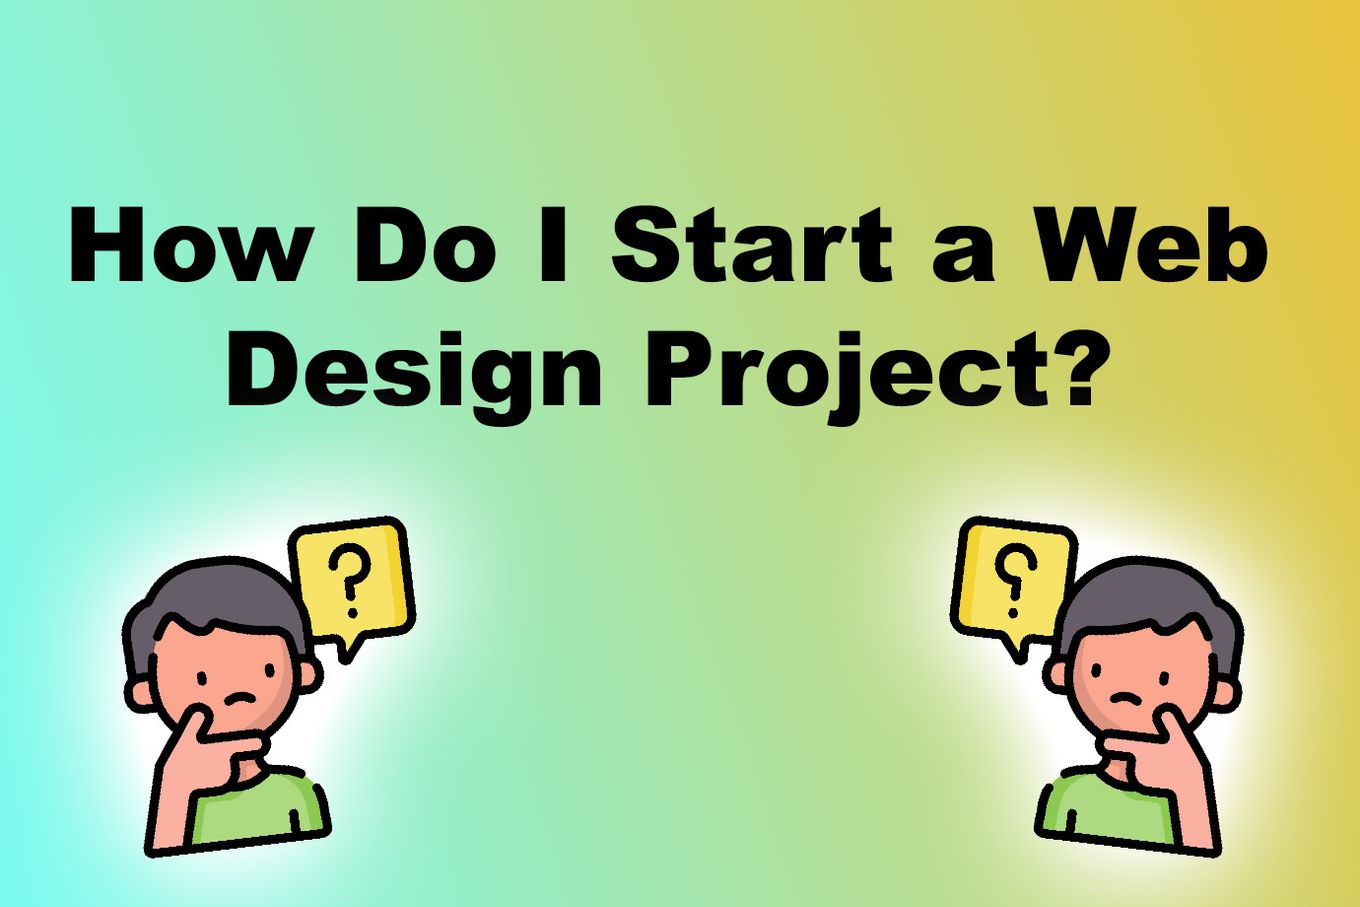 How Do I Start a Web Design Project